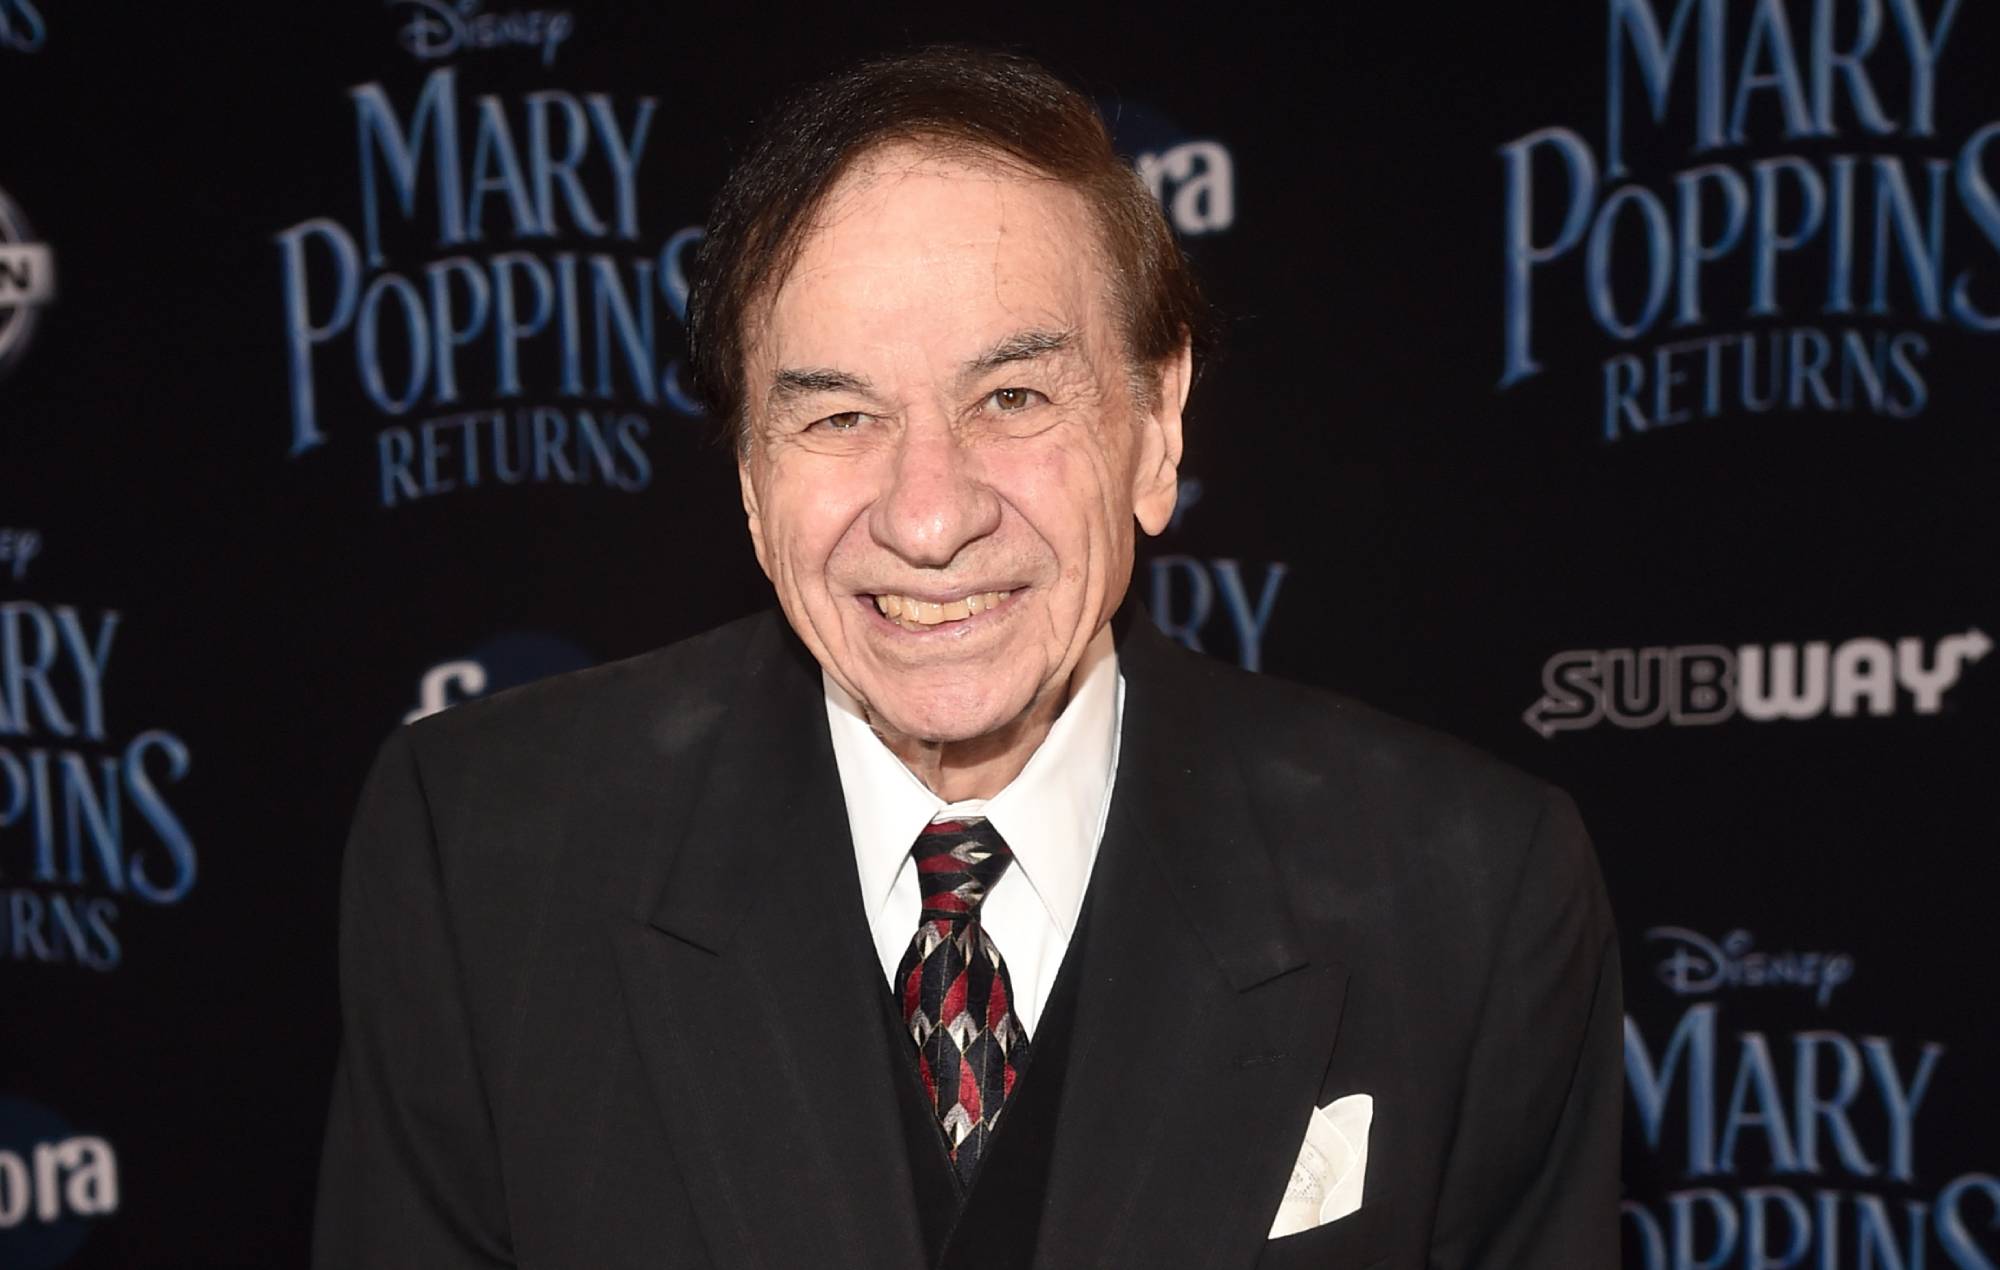 Richard M. Sherman, ‘Mary Poppins’ and ‘The Jungle Book’ composer, dies at 95